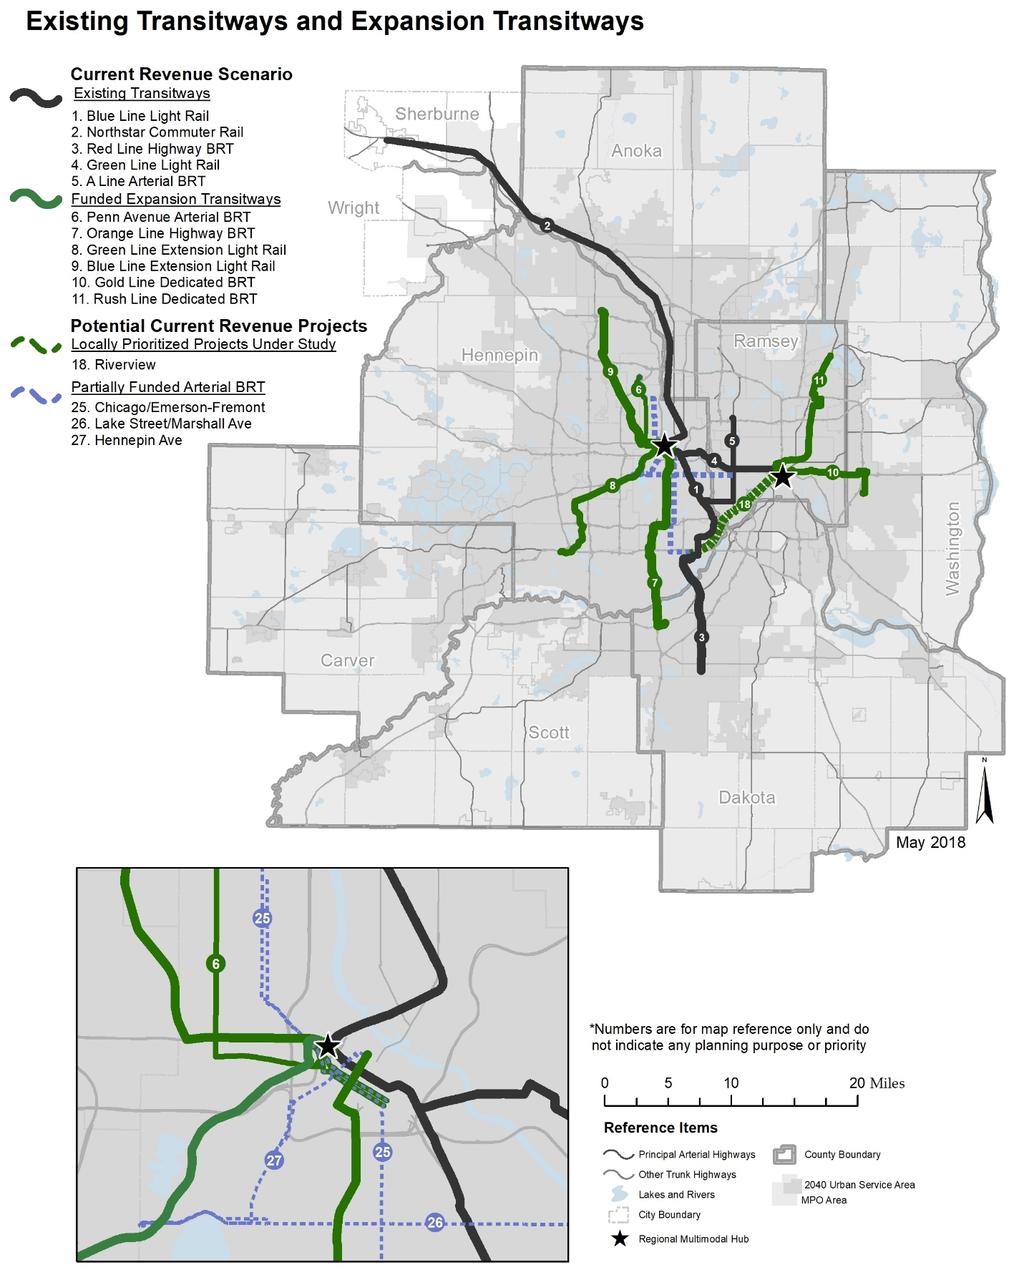 Figure 6-8: Map of Existing Transitways and Current Revenue Scenario Expansion Transitways 2040